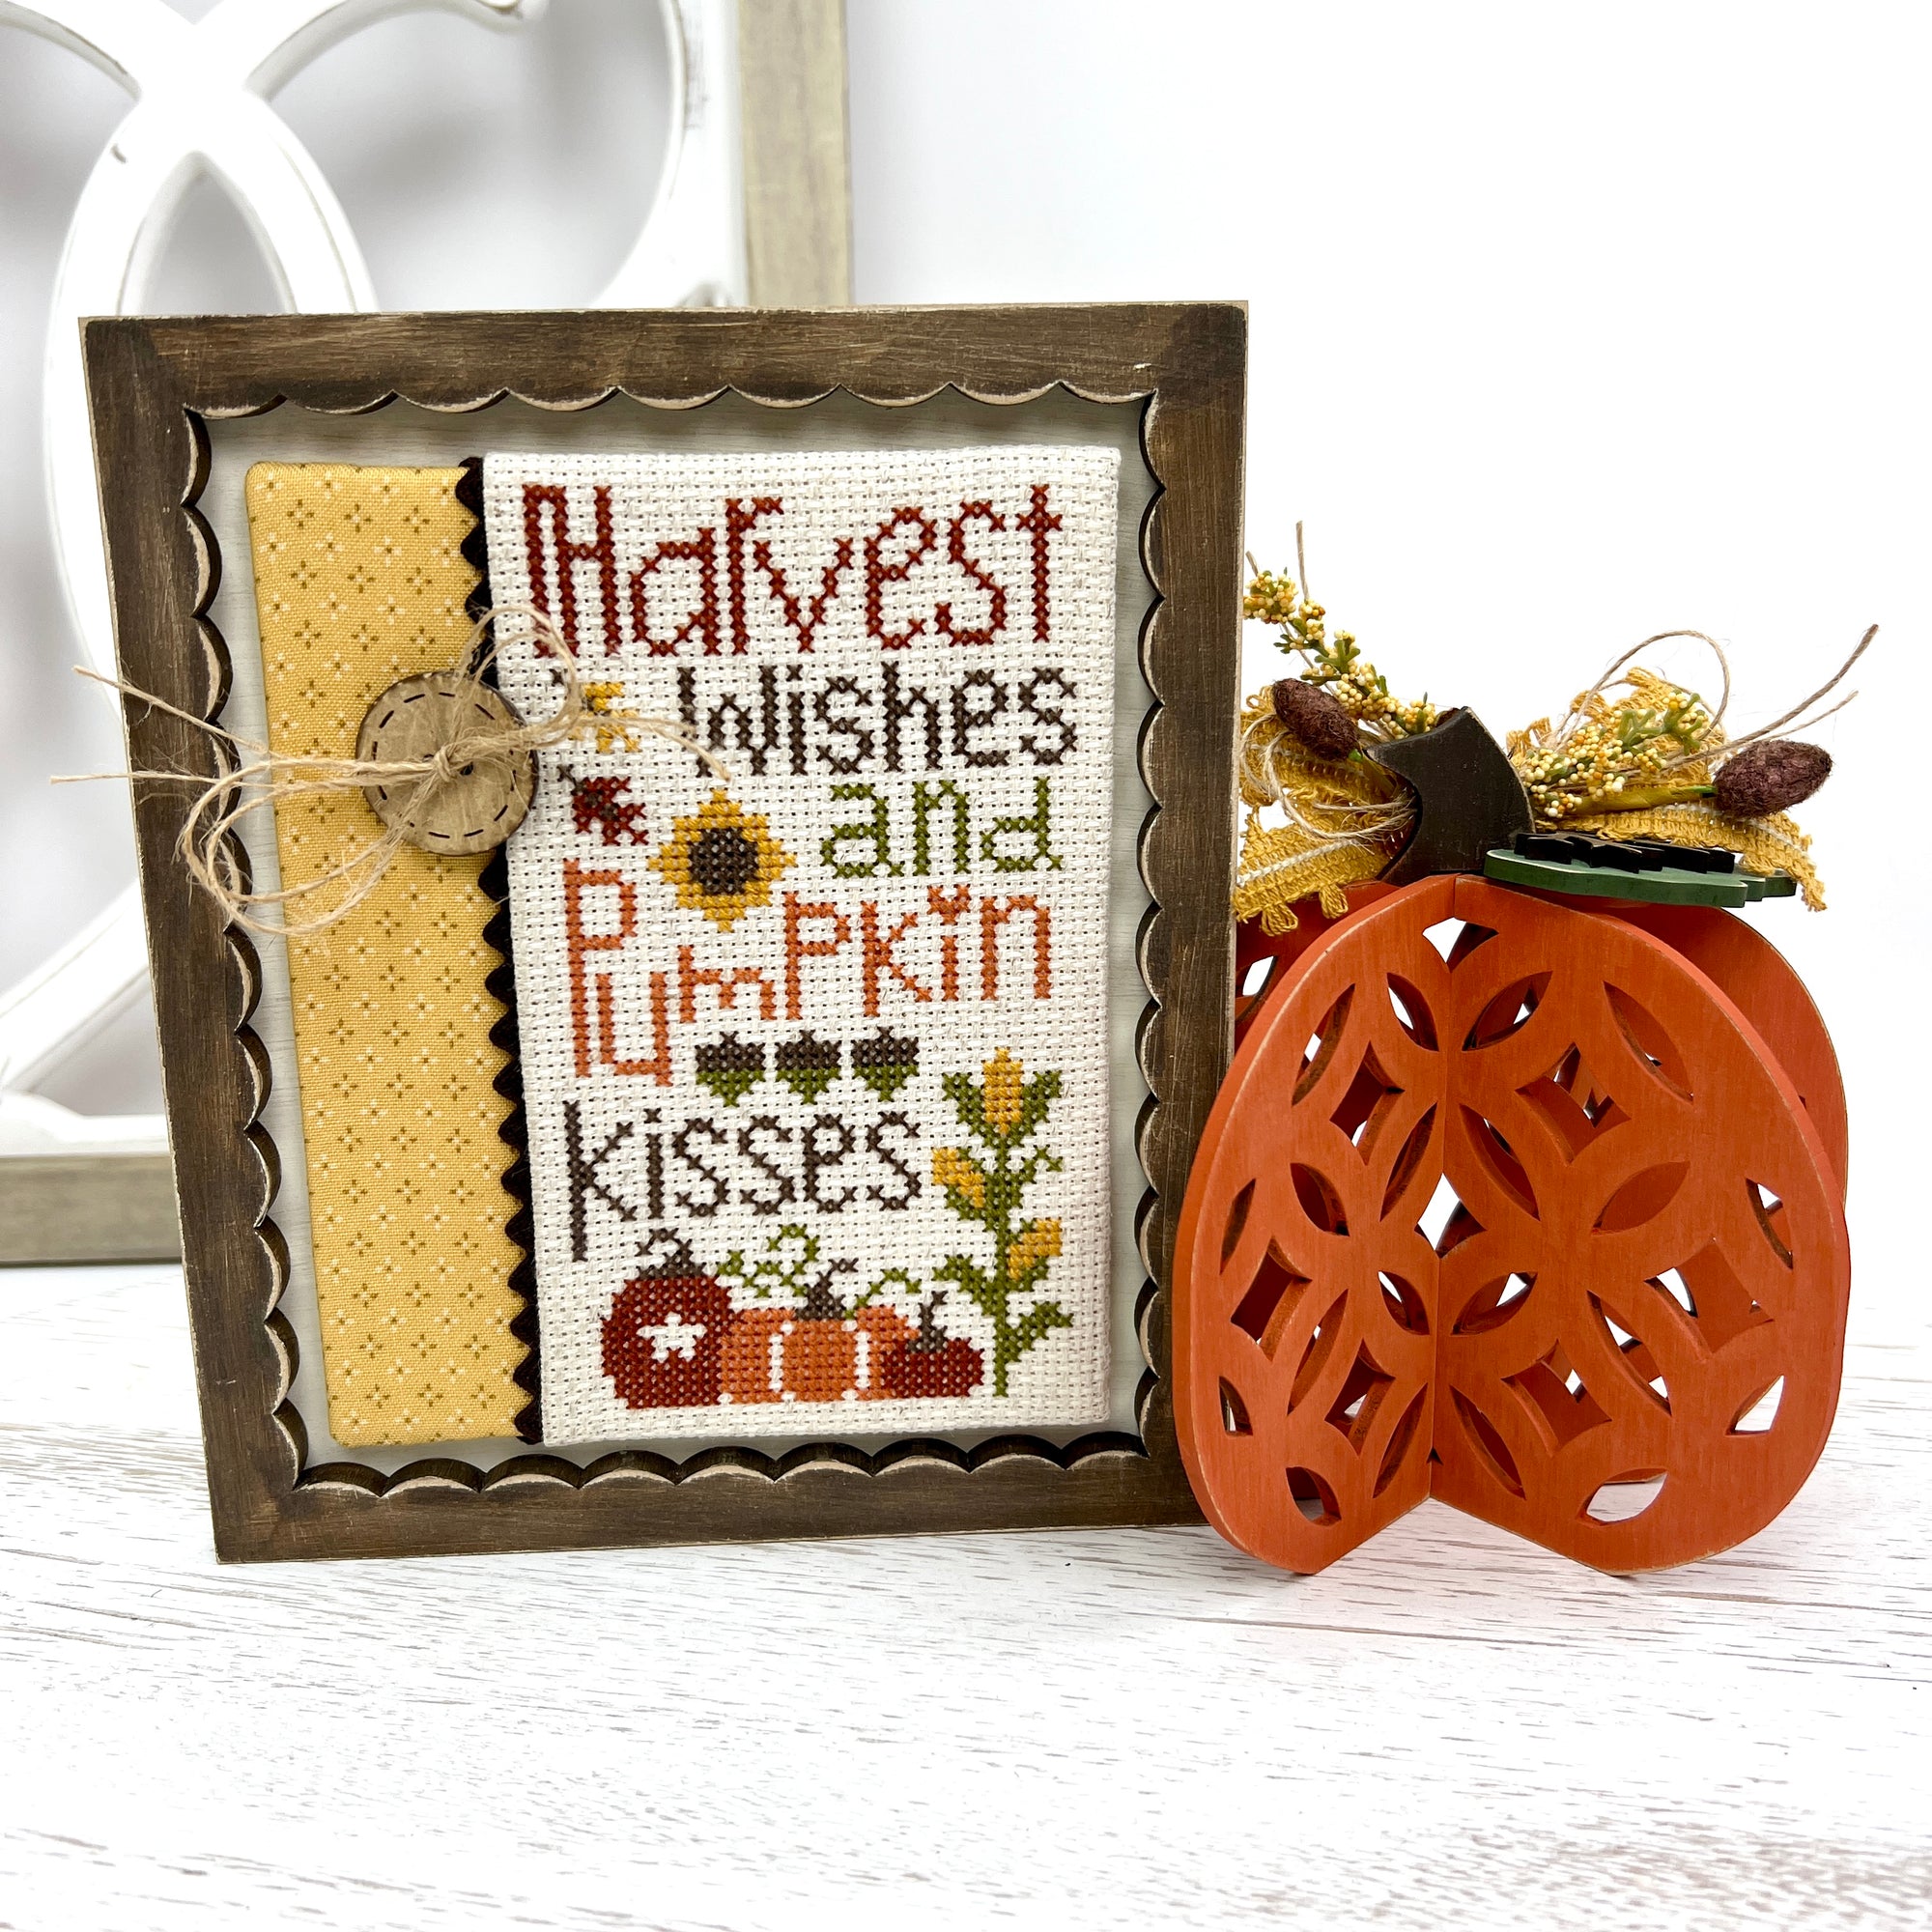 Fall pumpkin and frame with a fall cross stitch displayed wood decor craft kit